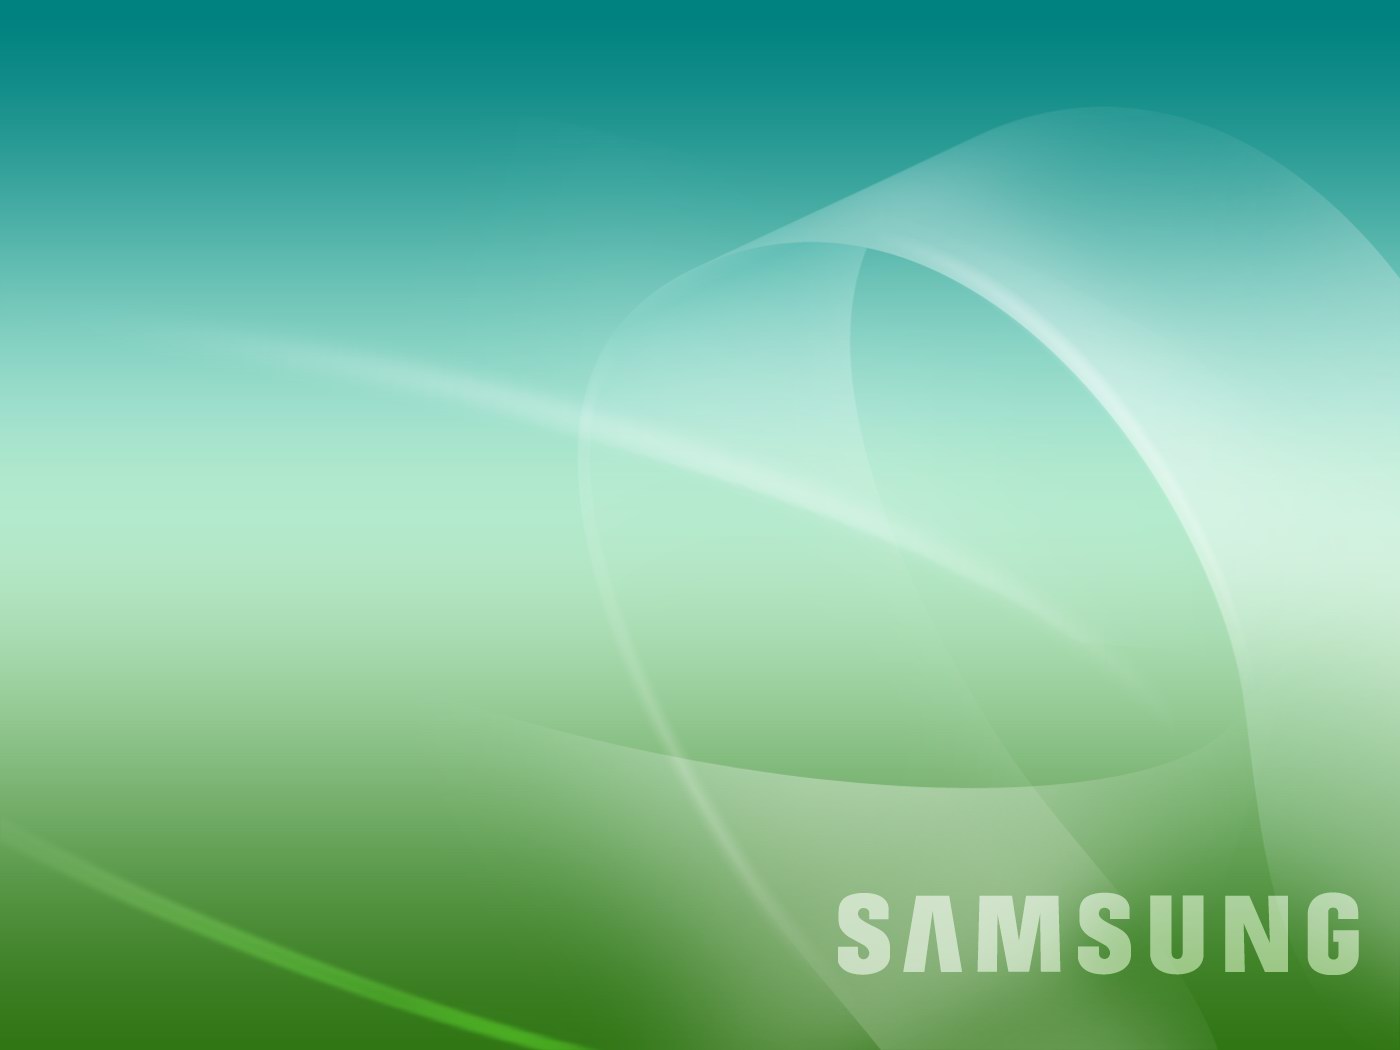 Samsung Wallpapers Free Download #6927976